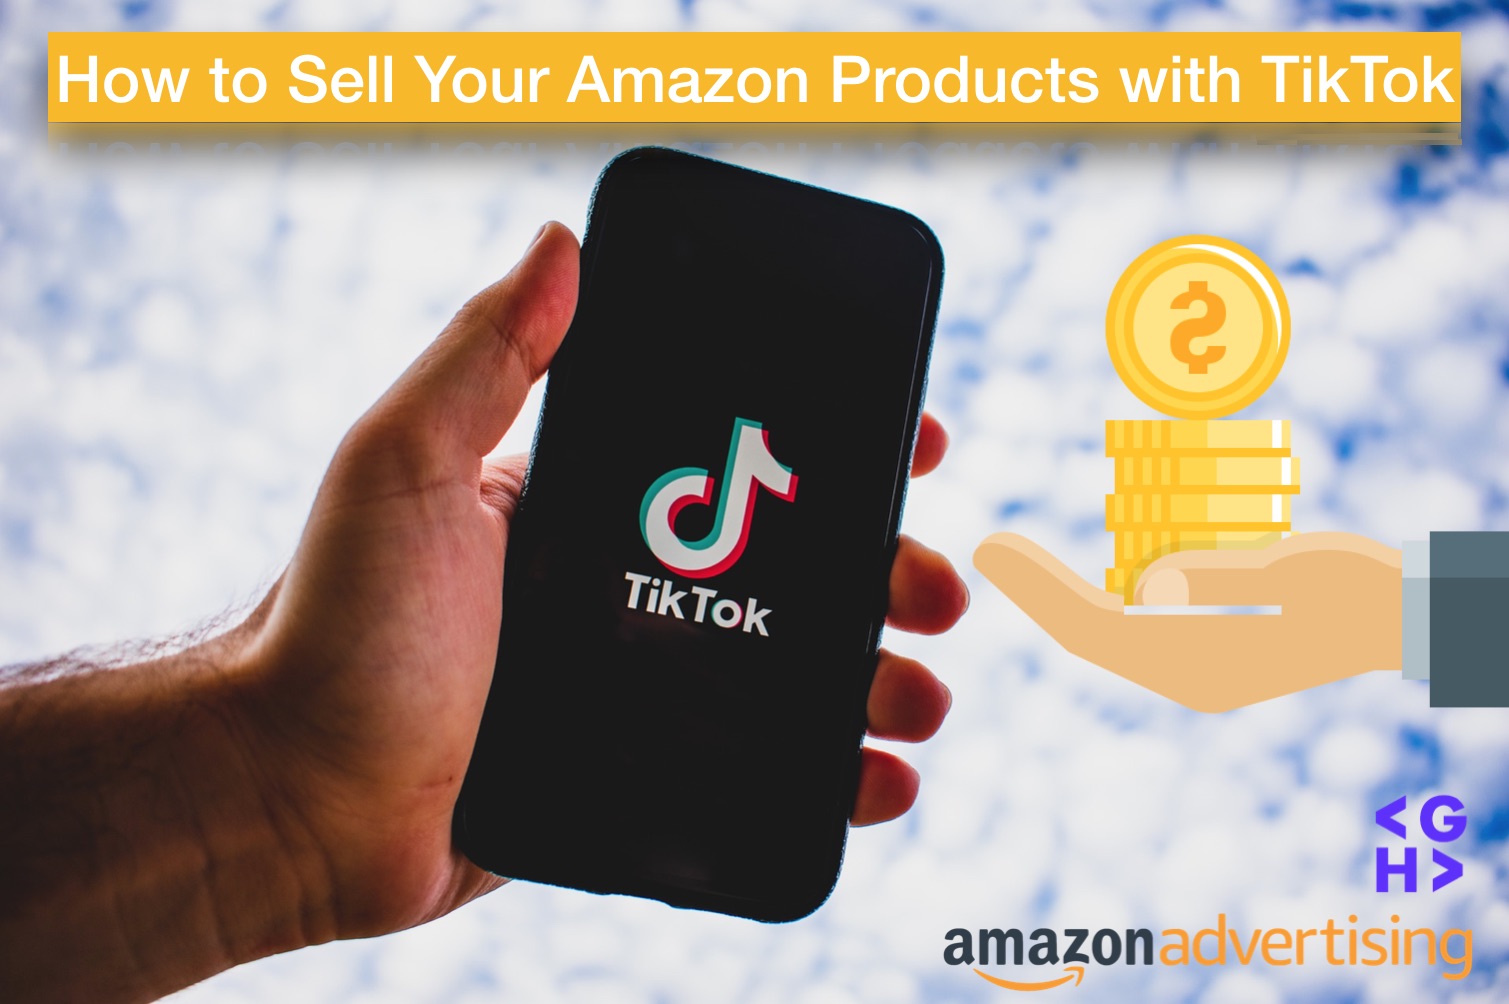 TikTok: How this new App can Help You Sell more Products on Amazon FBA & Dropshipping – Marketing & Promotion Tips